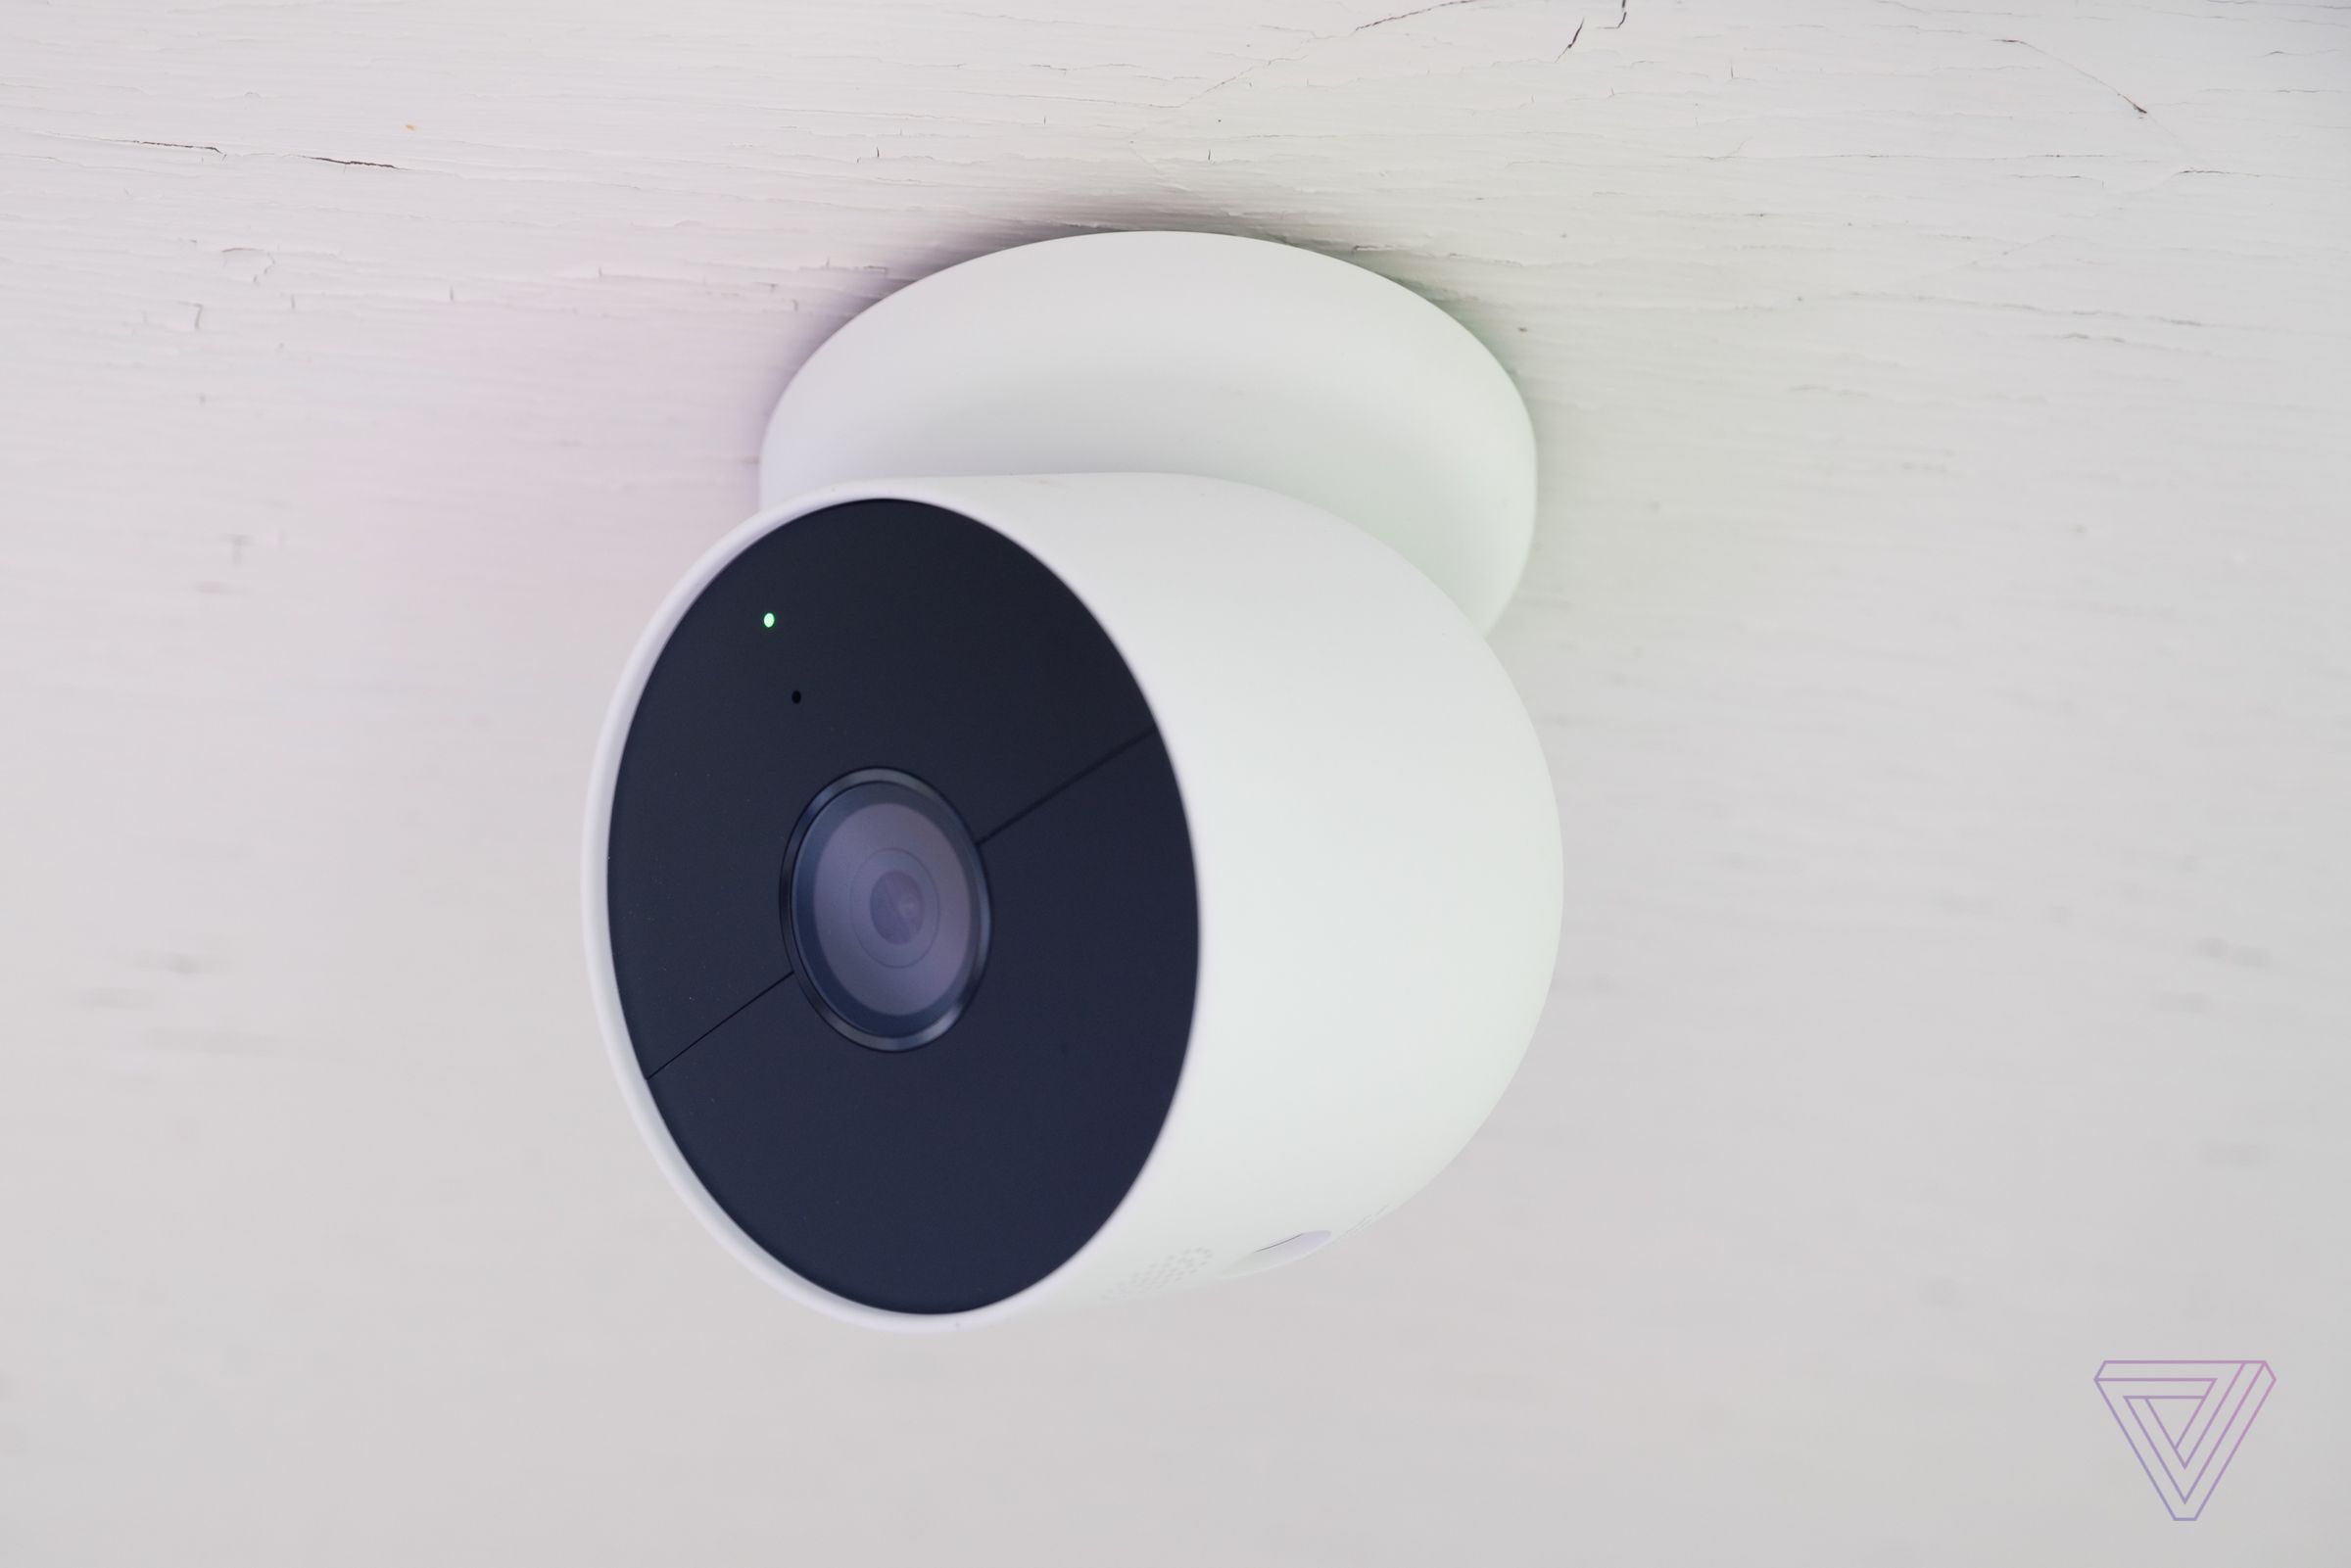 The new Nest Cam is attractive, at least as far as security cameras go.